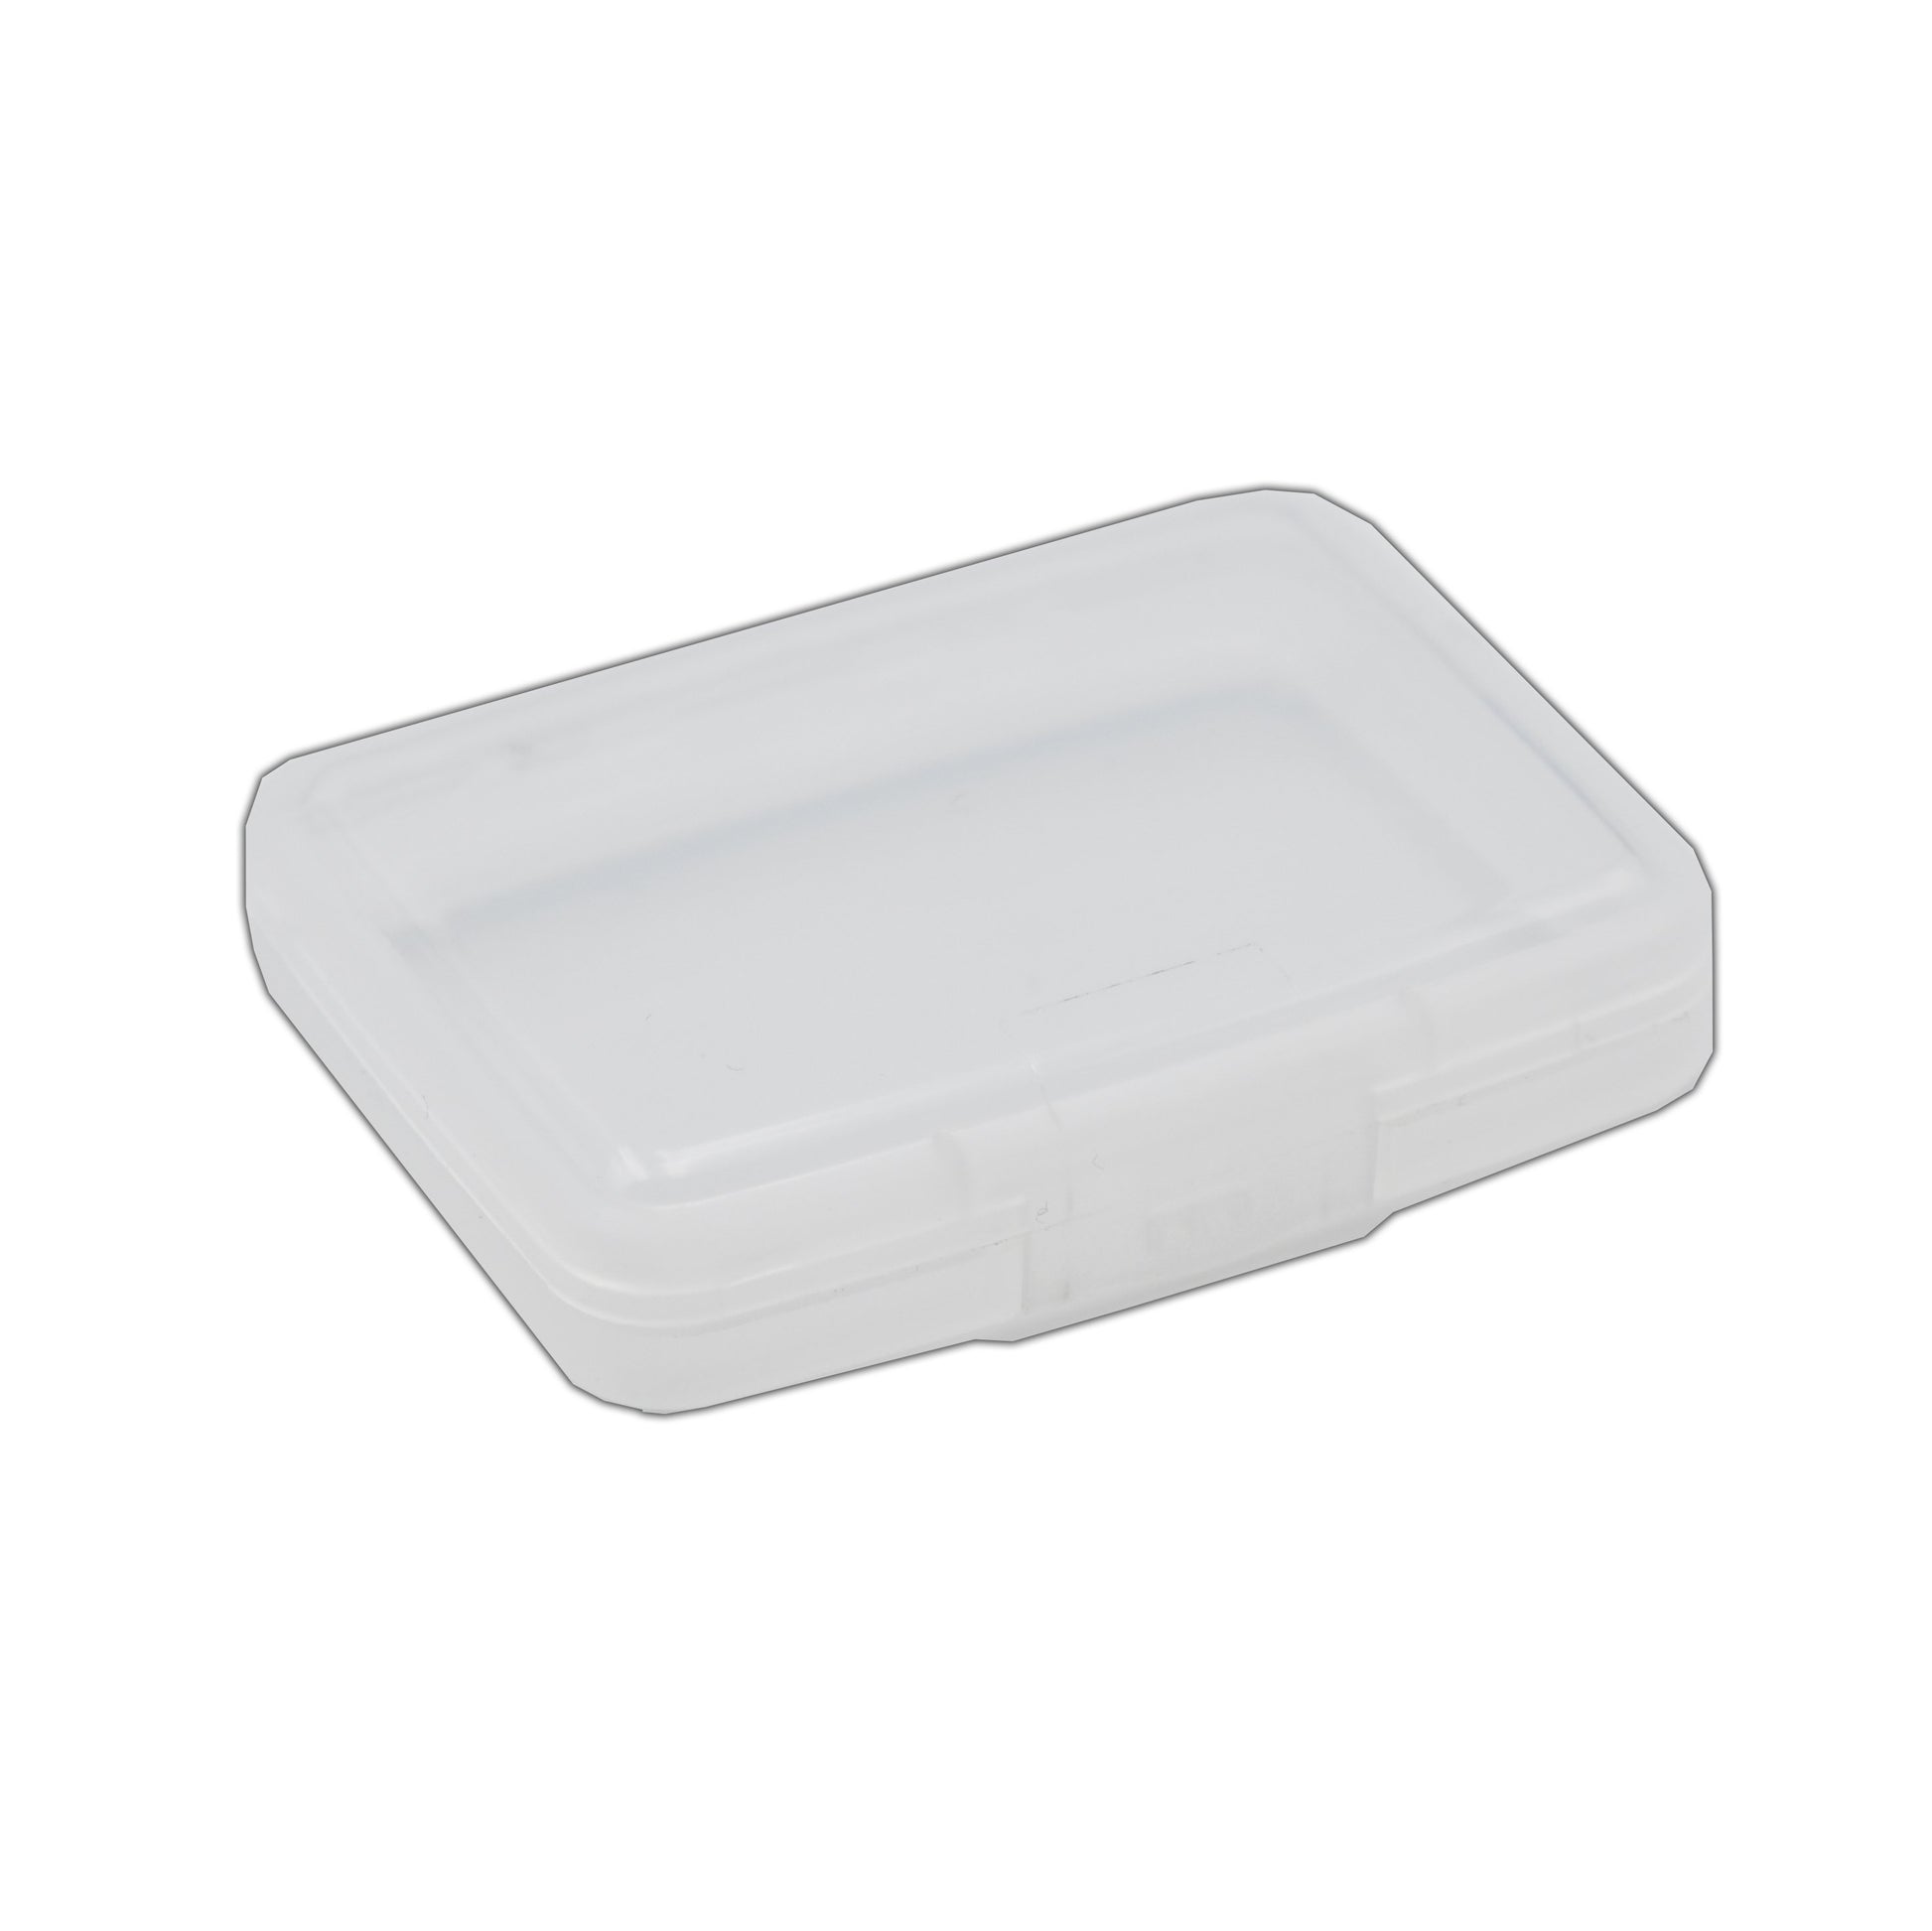 Brand King Soft Plastic Shatter Container